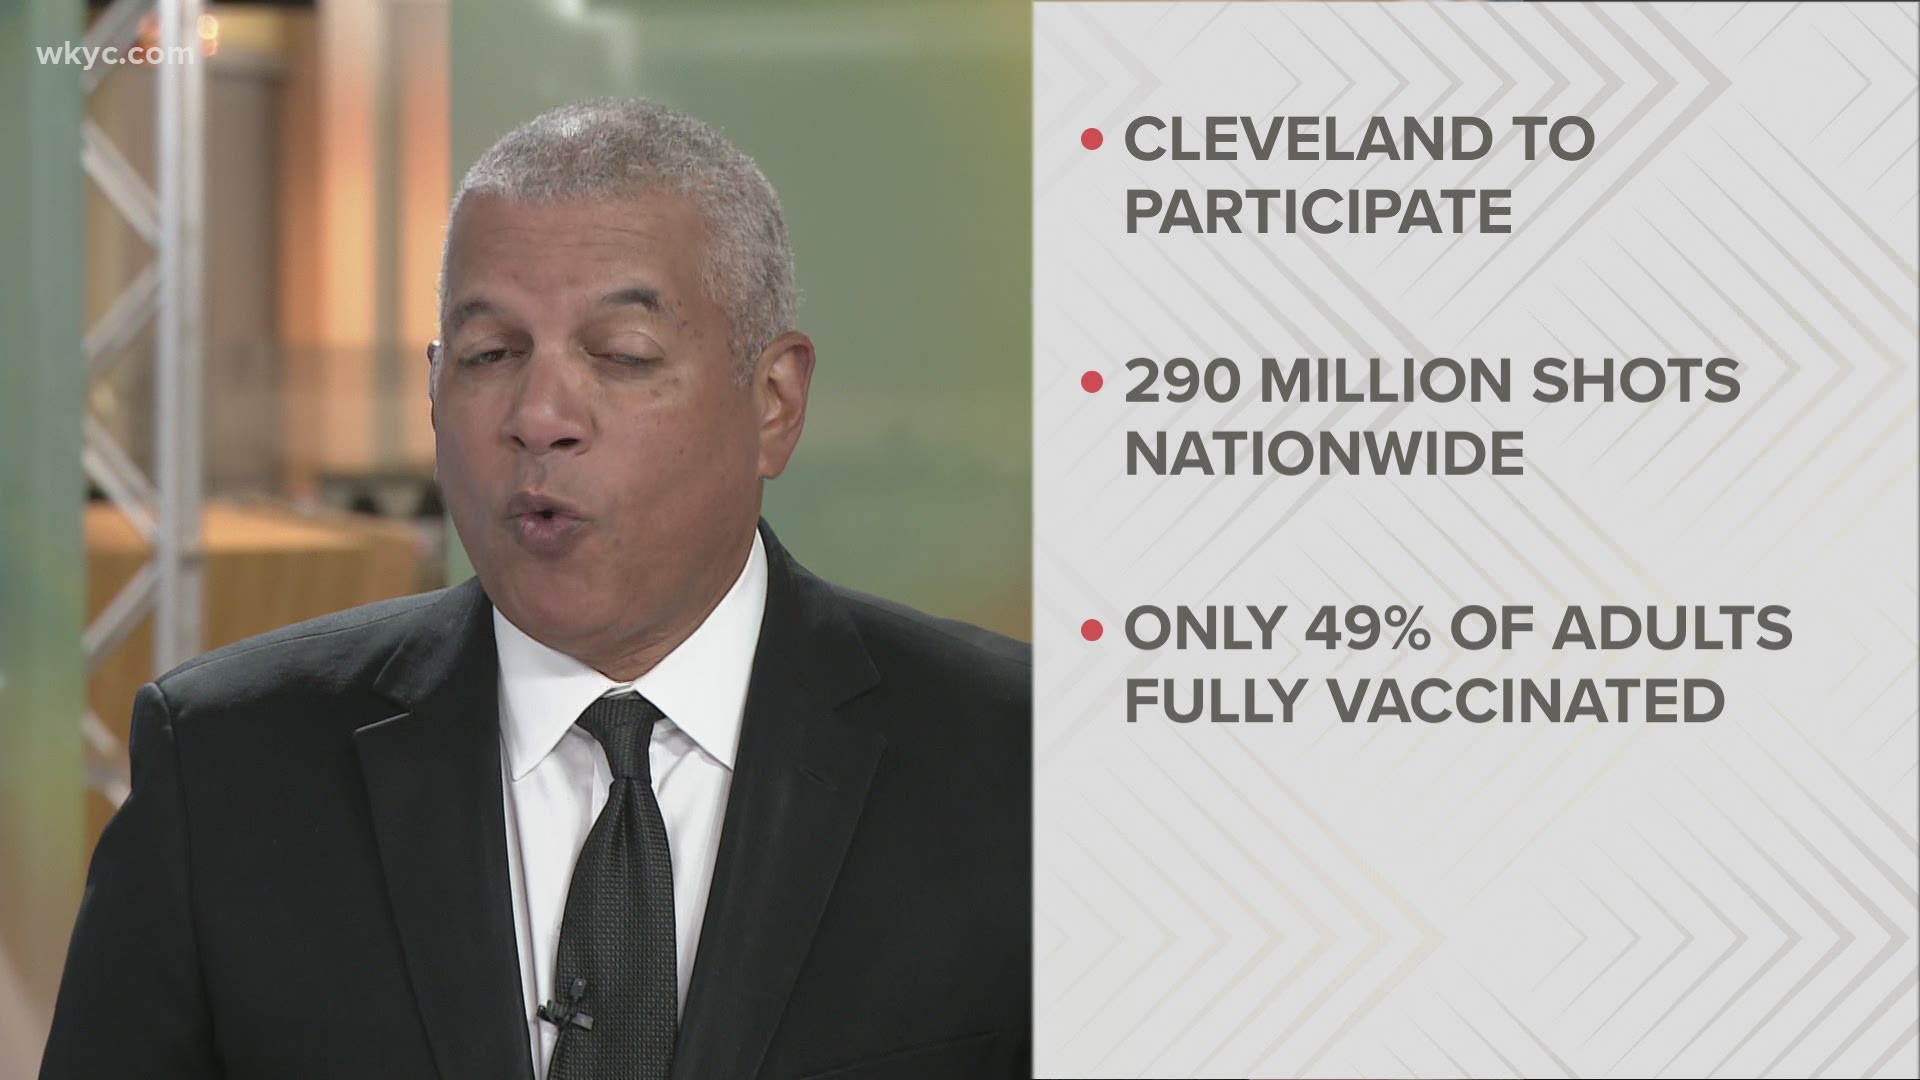 Cleveland Mayor Frank Jackson is helping President Biden step up his effort to vaccinate more Americans. Only 49% of Clevelanders have received a COVID-19 vaccine.